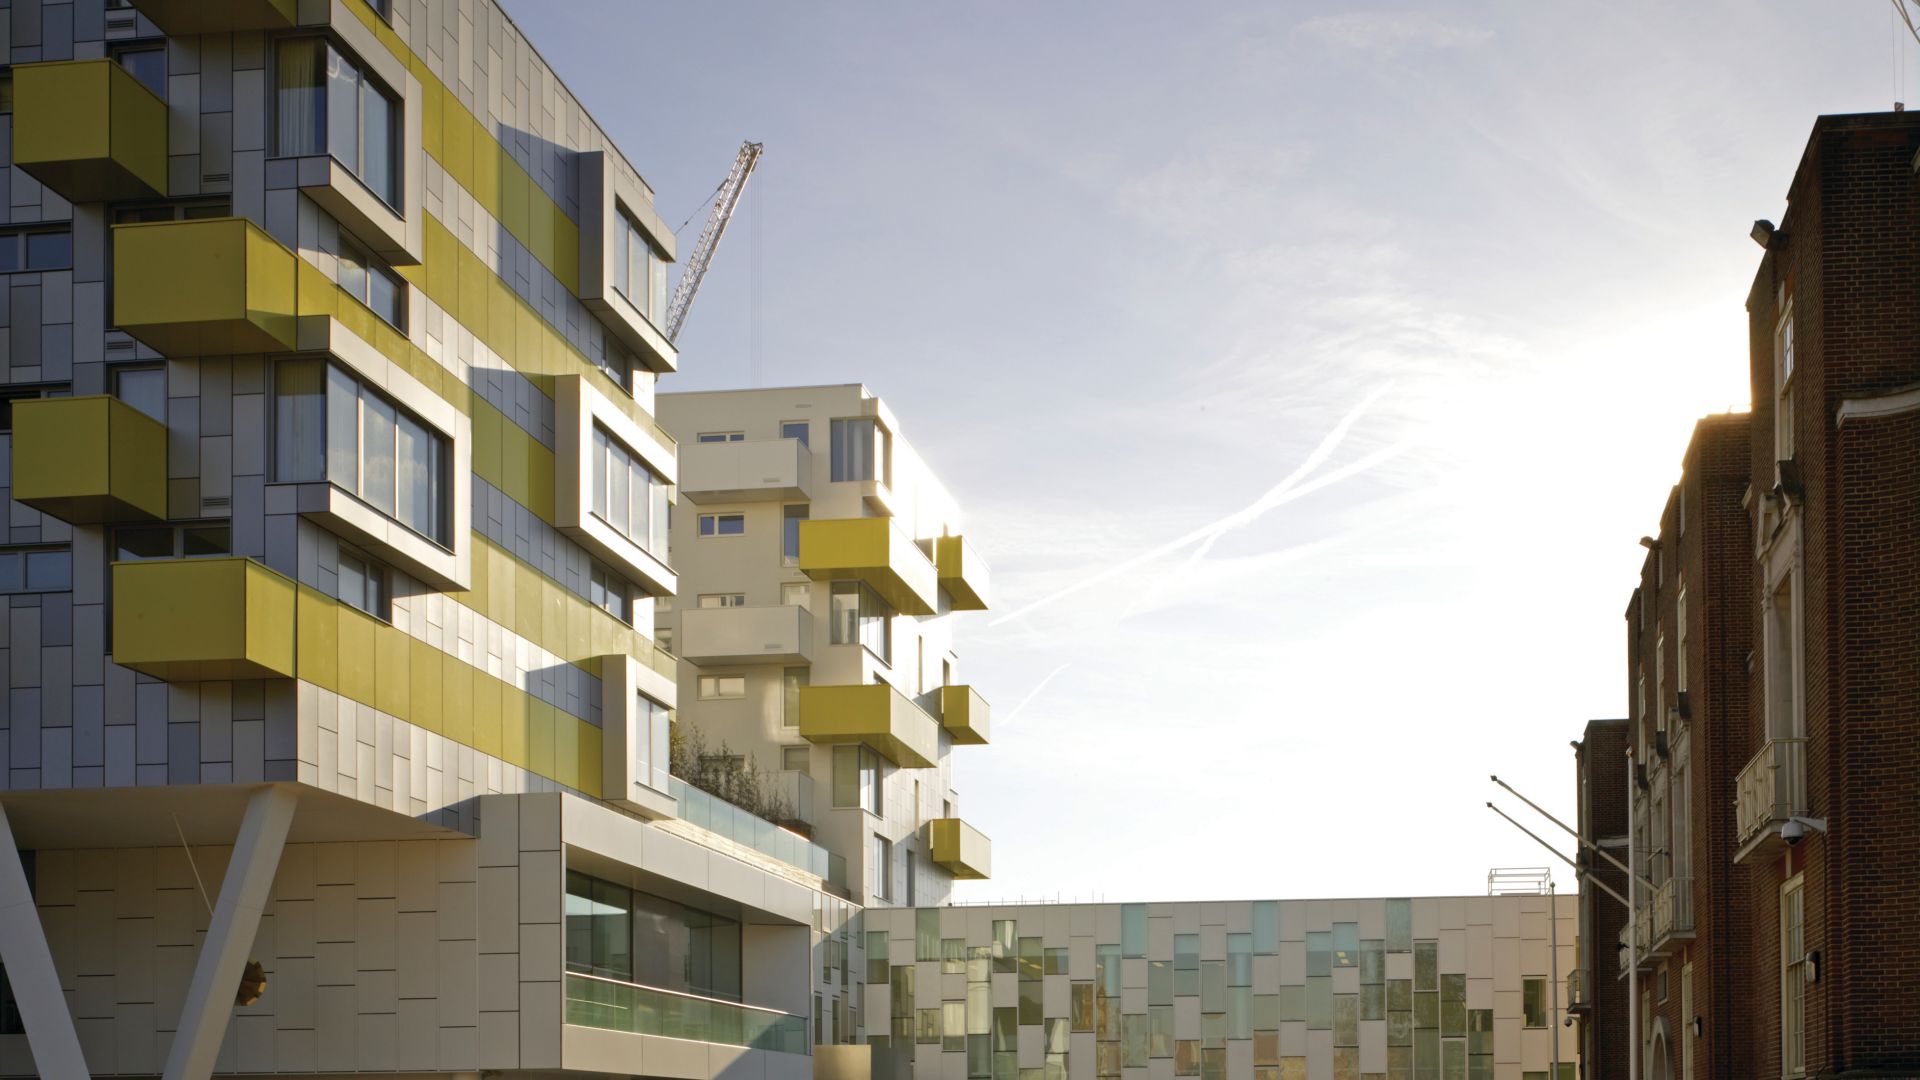 Apartment house with yellow colored panel parts